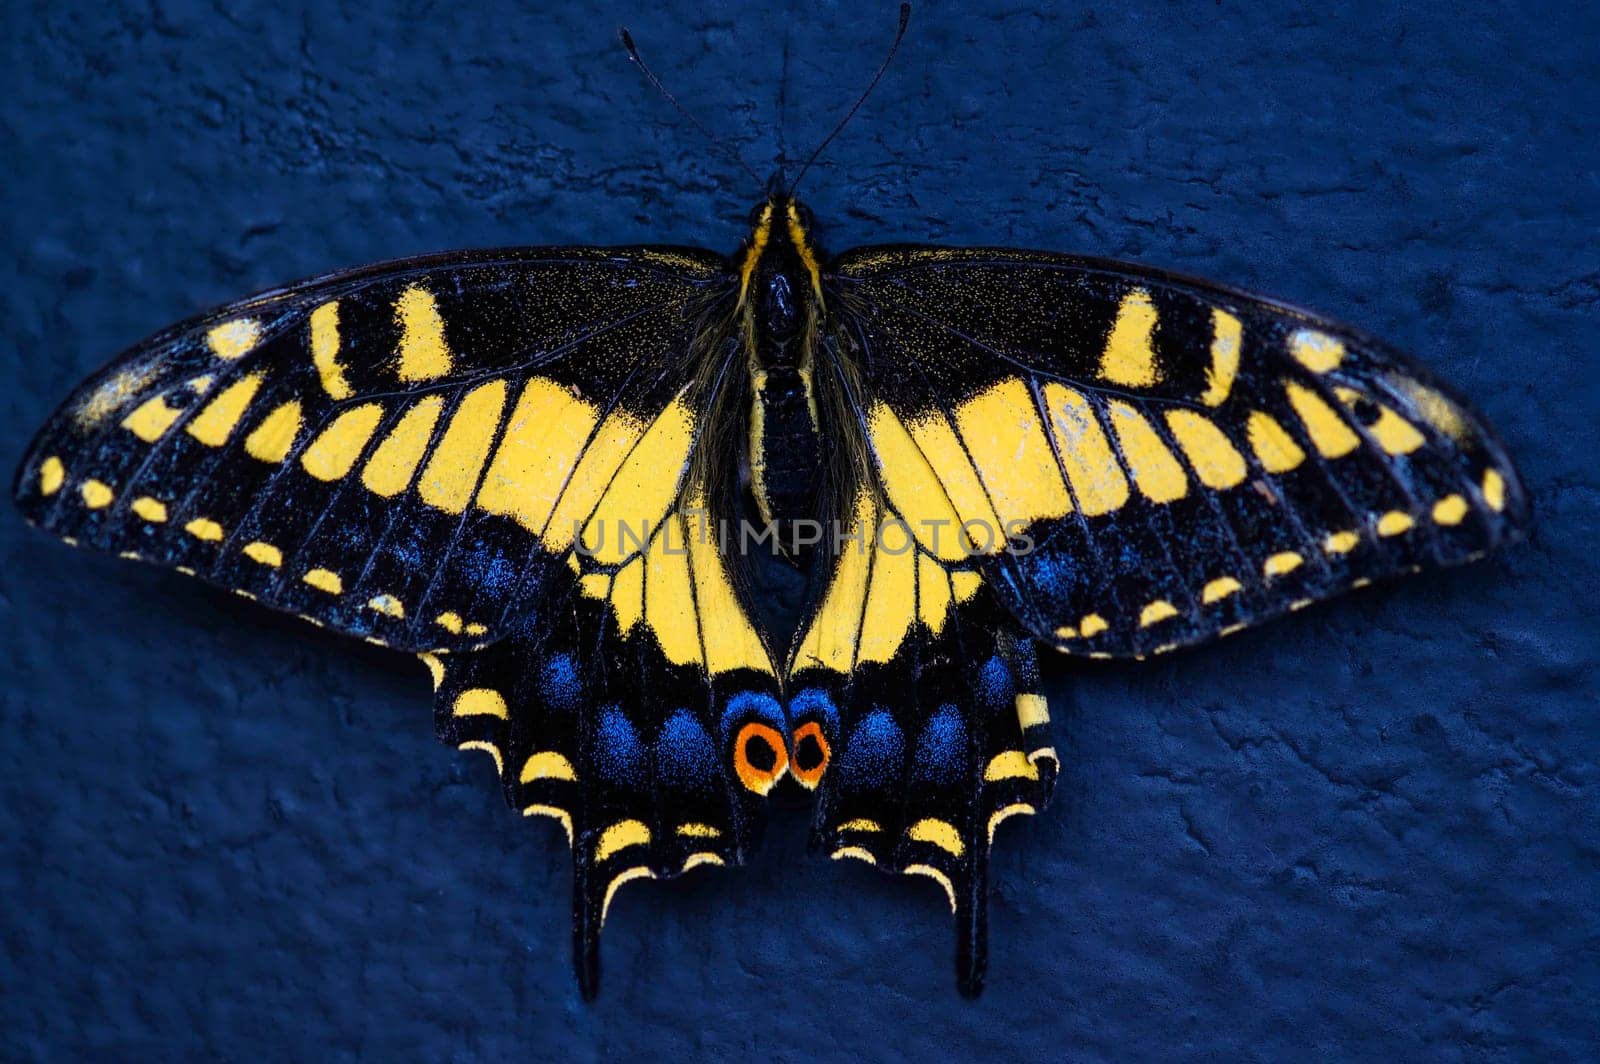 Anise Swallowtail Butterfly, Papilio zelicaon, Closeup in Rosarito, Baja California